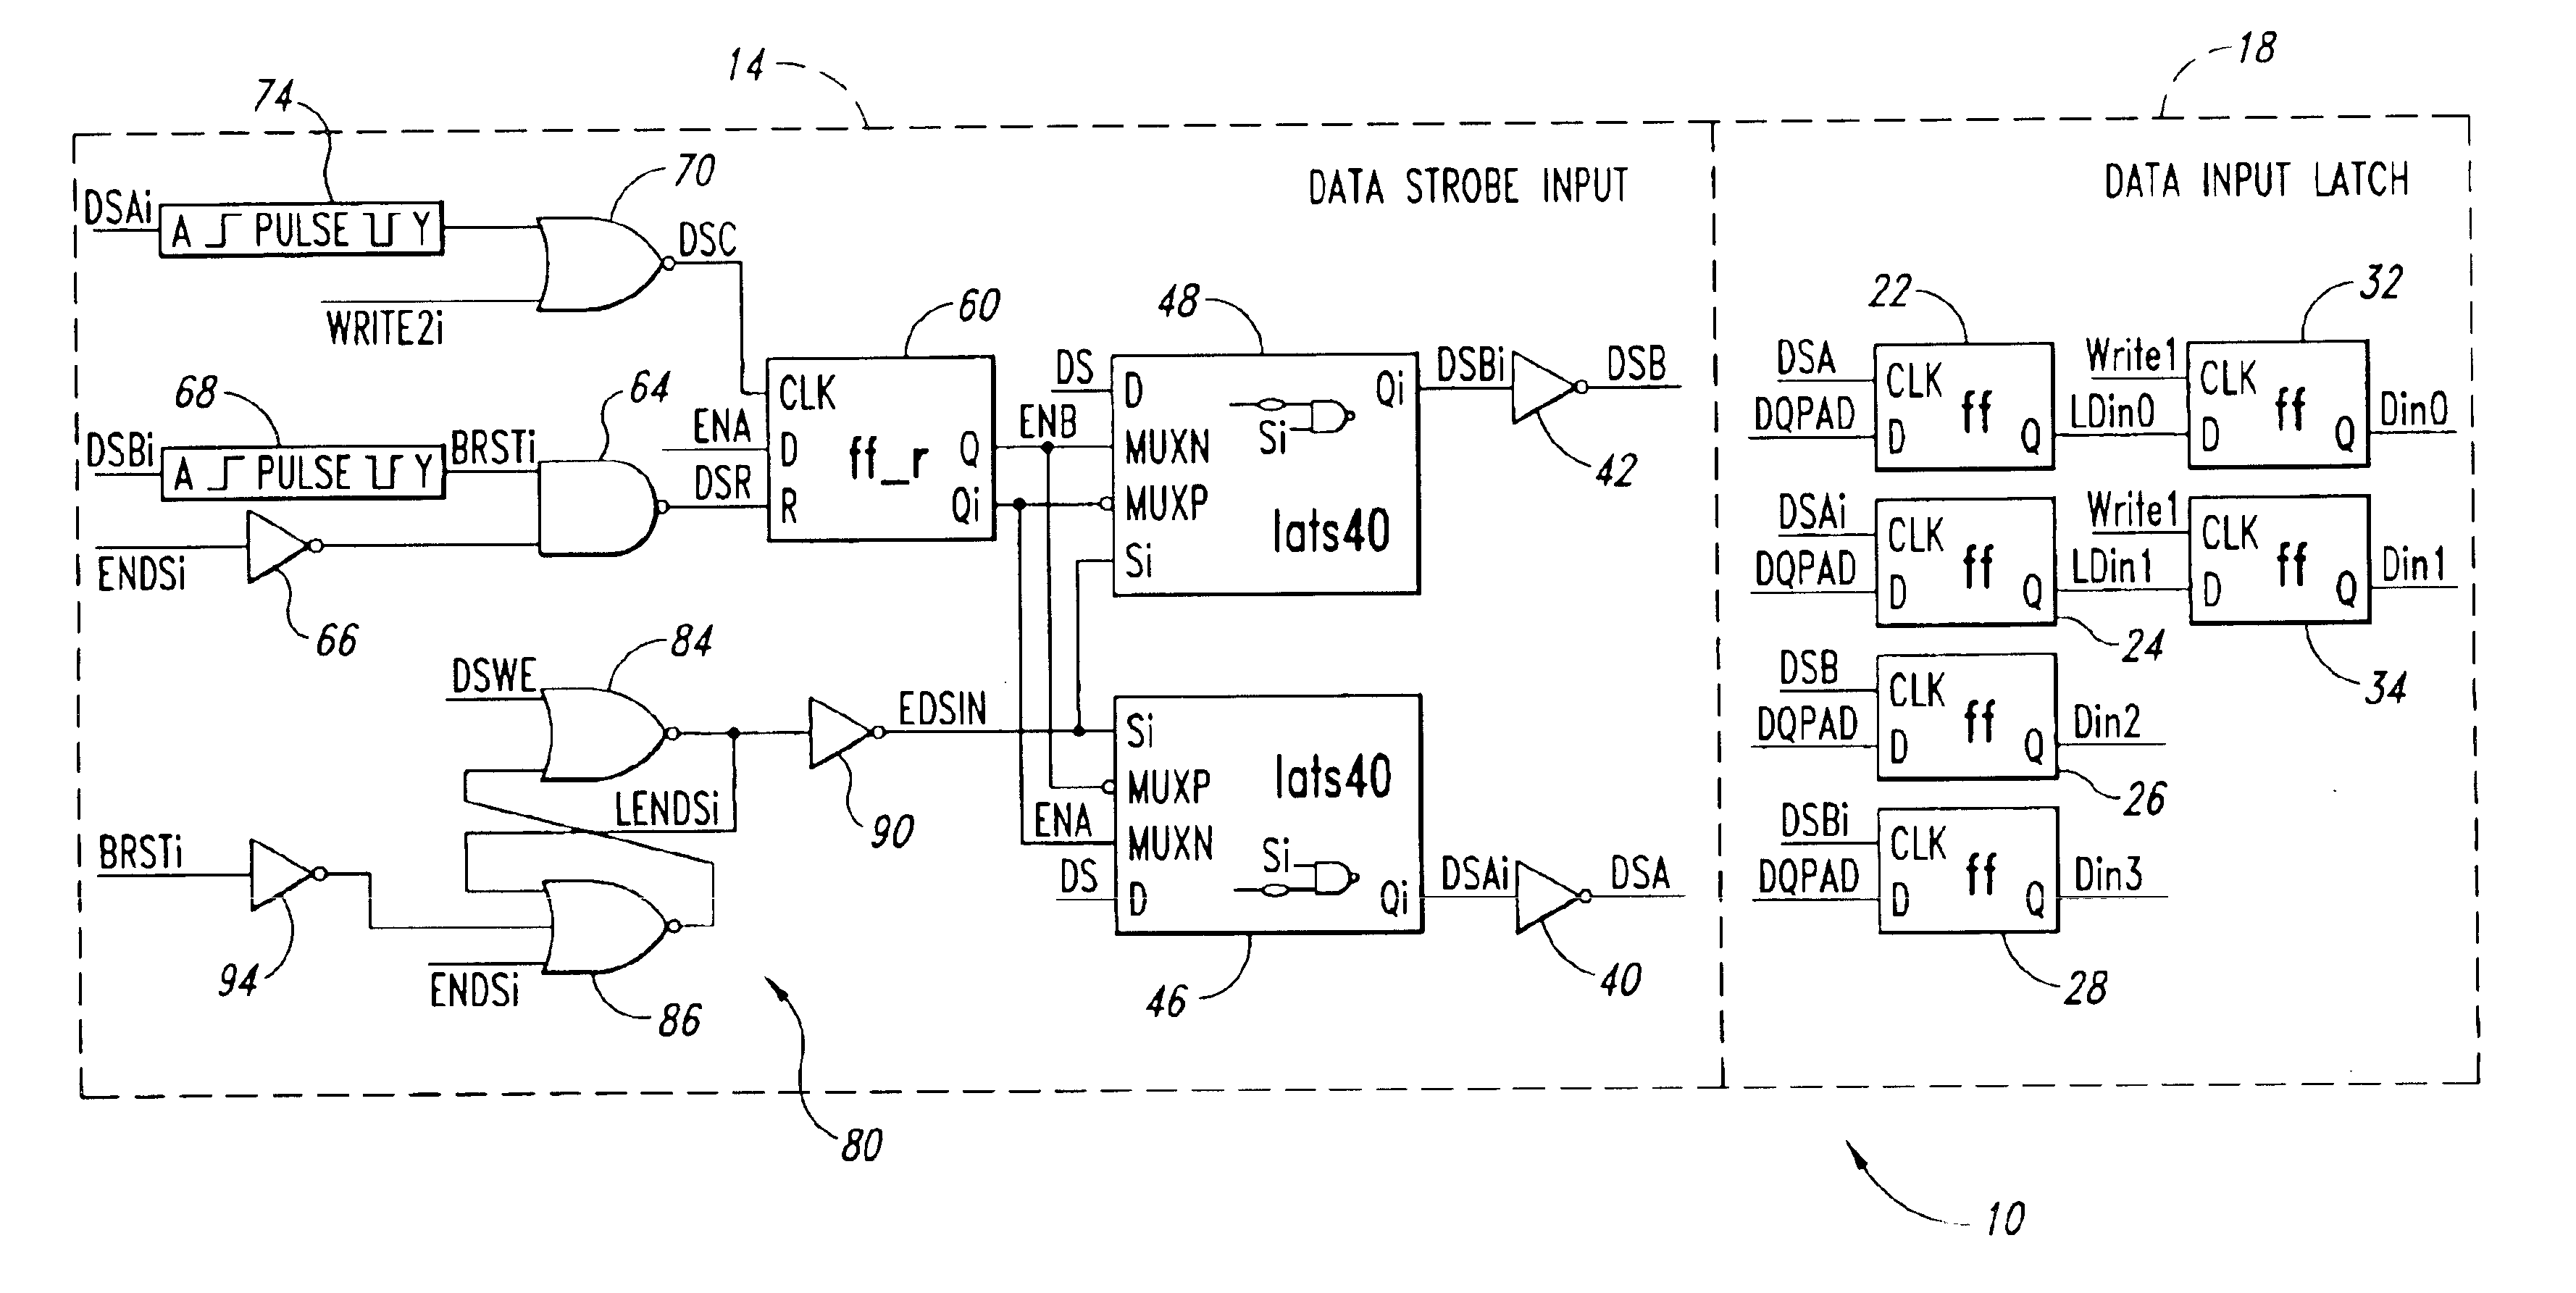 Data strobe synchronization circuit and method for double data rate, multi-bit writes